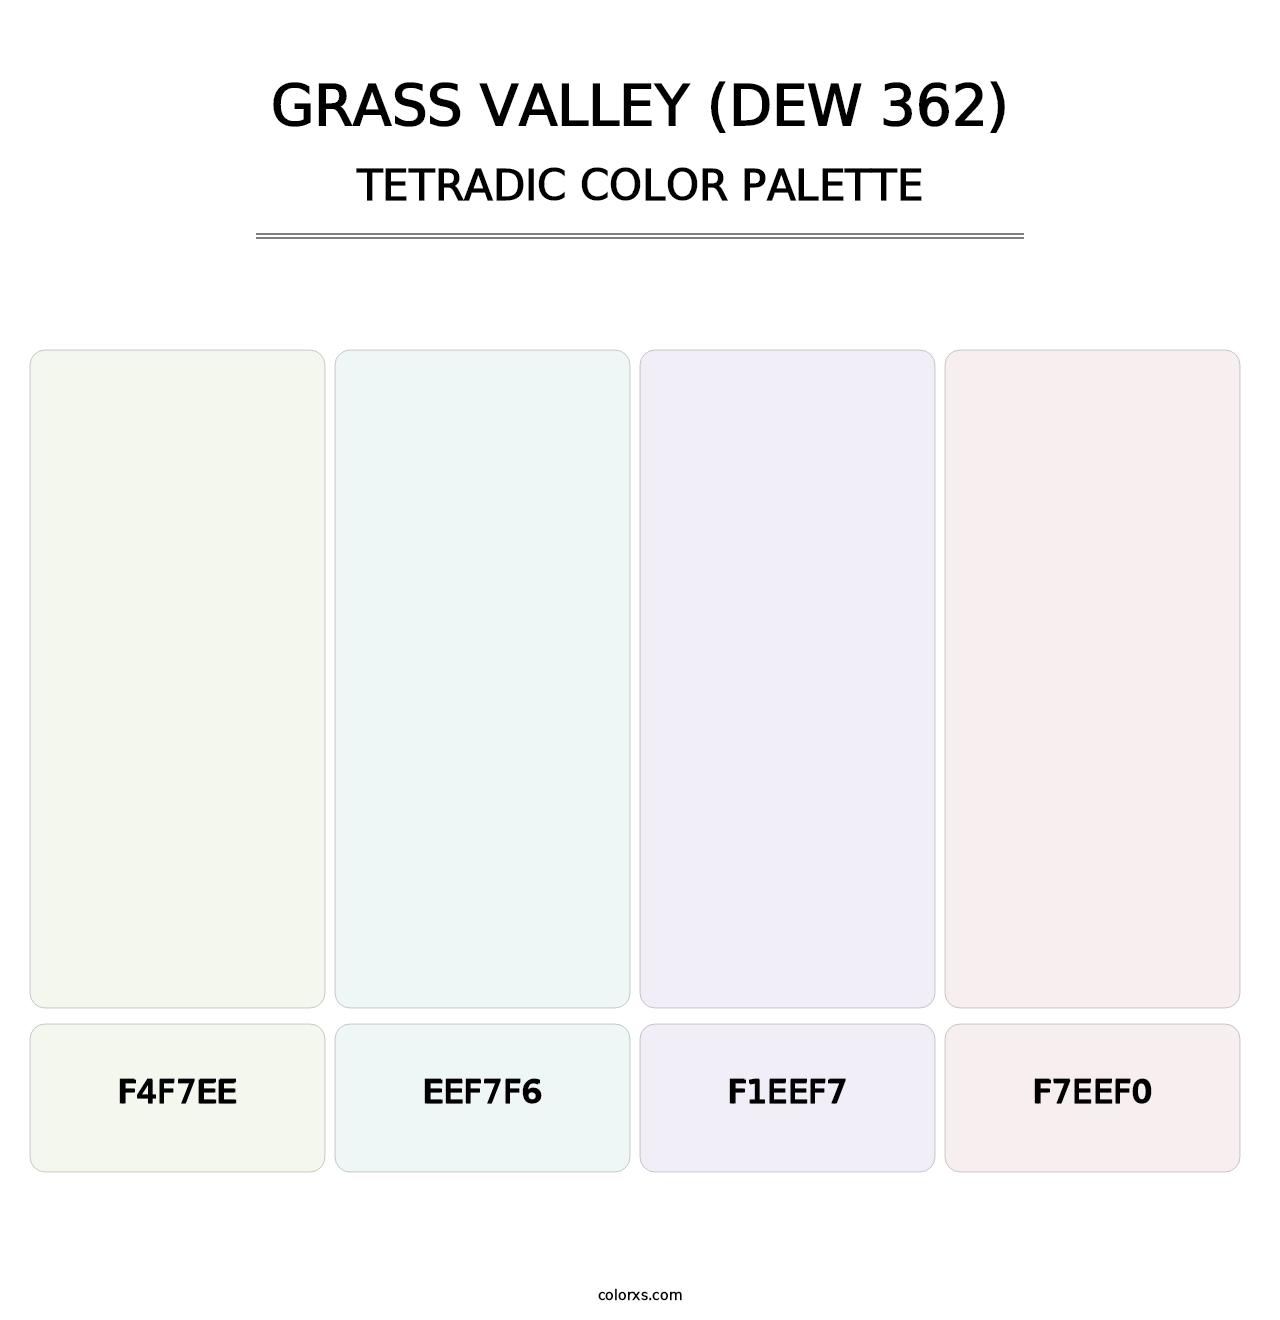 Grass Valley (DEW 362) - Tetradic Color Palette